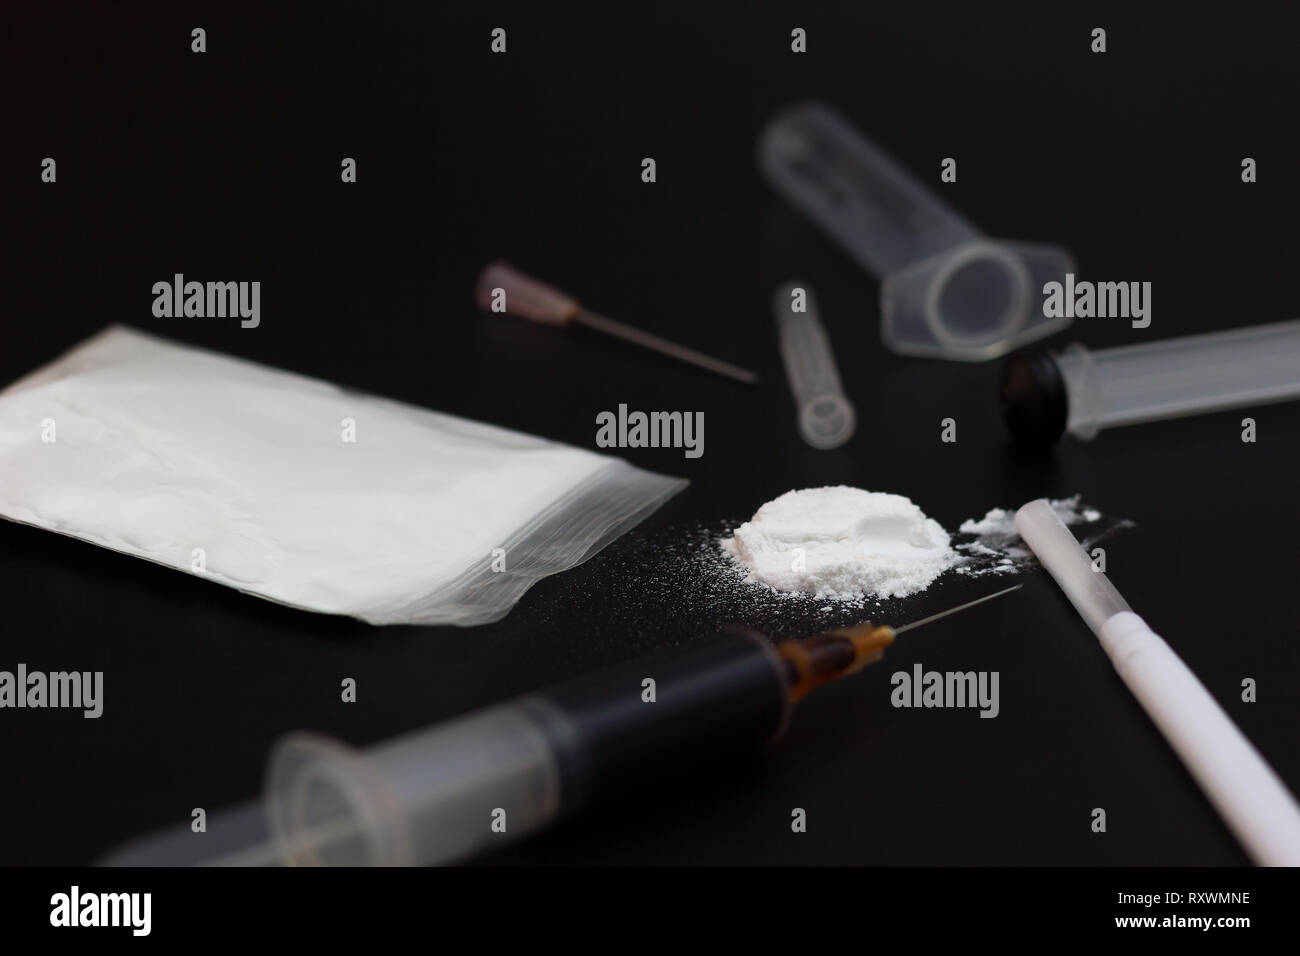 Fake Heroin or diacetylmorphine bag and syringes placed side by side. Low key addictive substance on darkness background. Stock Photo